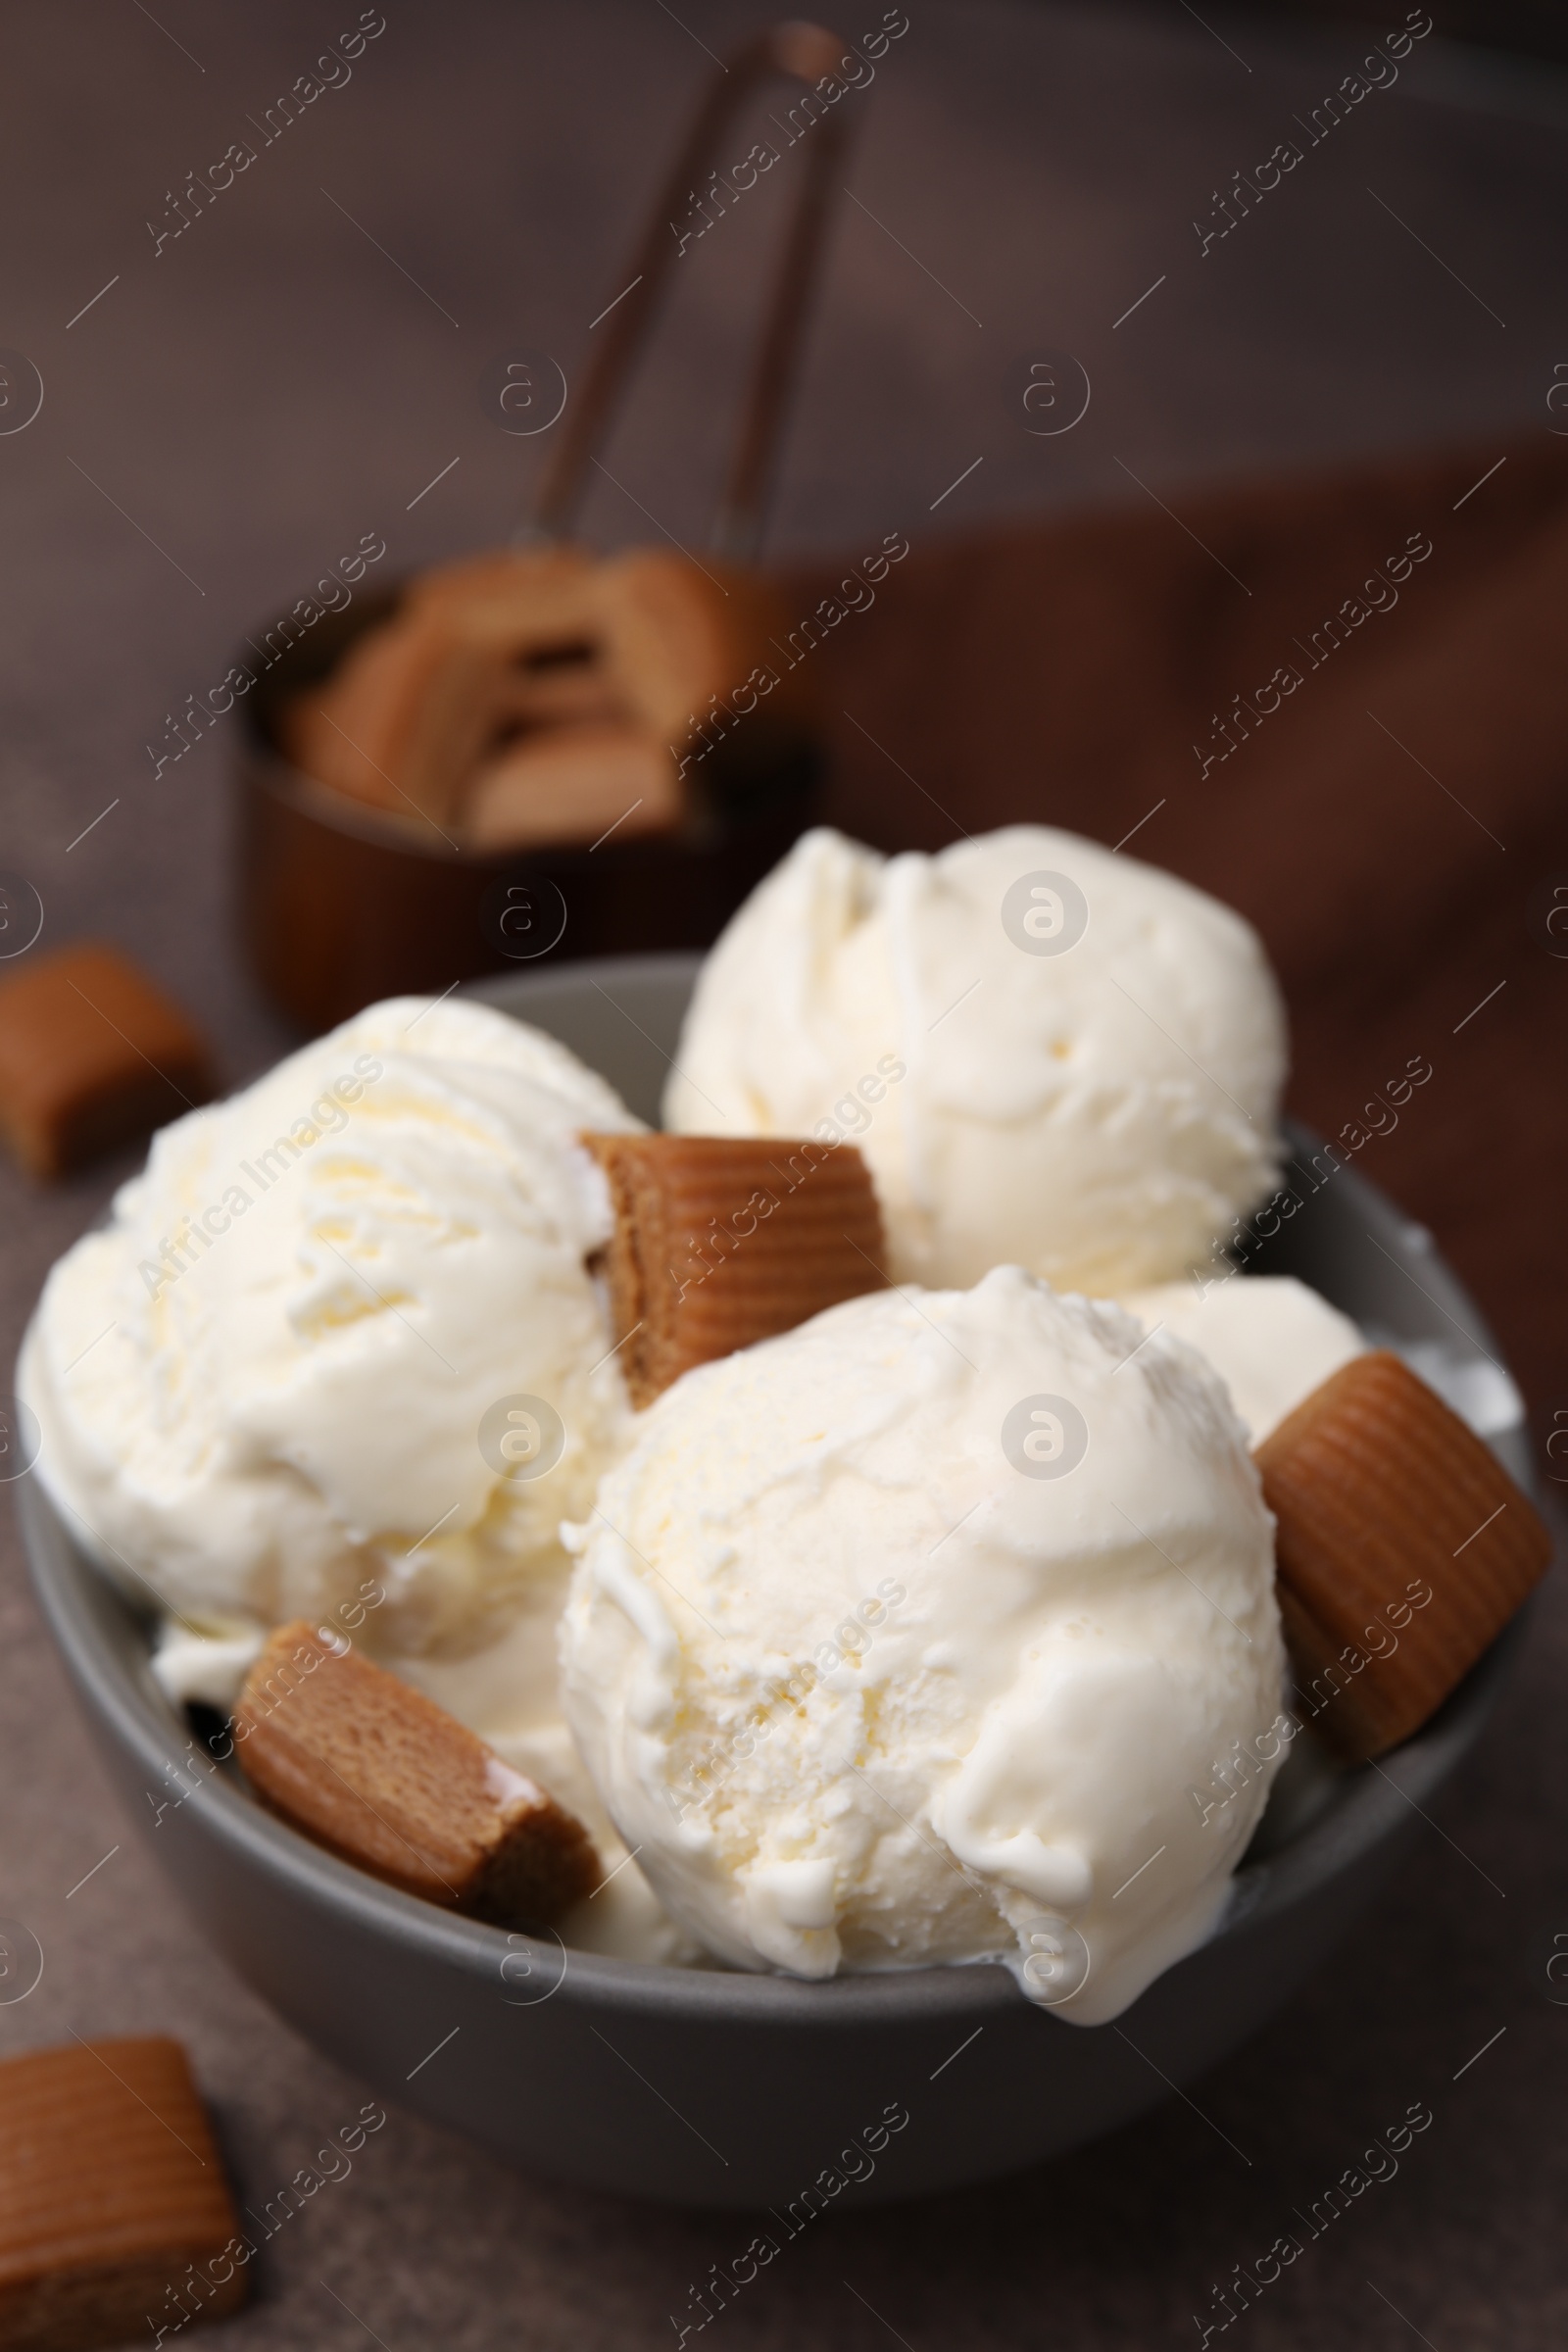 Photo of Scoops of ice cream with caramel candies in bowl on textured table, closeup